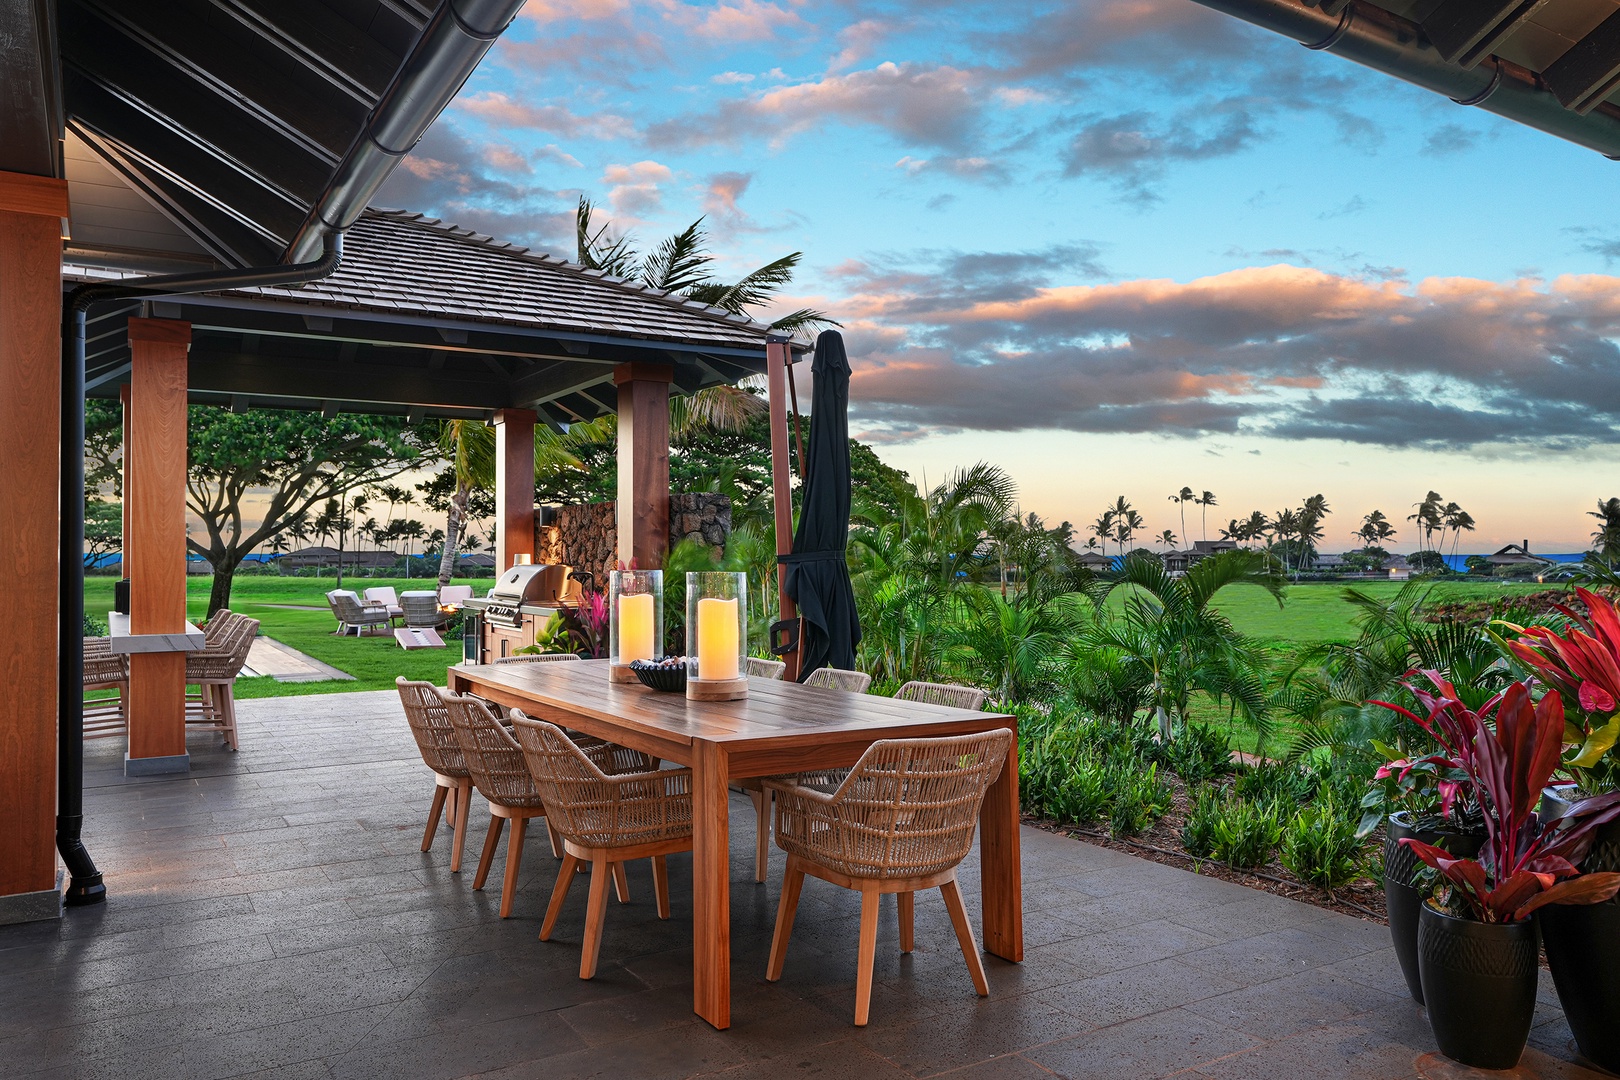 Koloa Vacation Rentals, Hale Pakika at Kukui'ula - Al fresco dining on the patio at sunset is the perfect time to recap the island day's exploration.